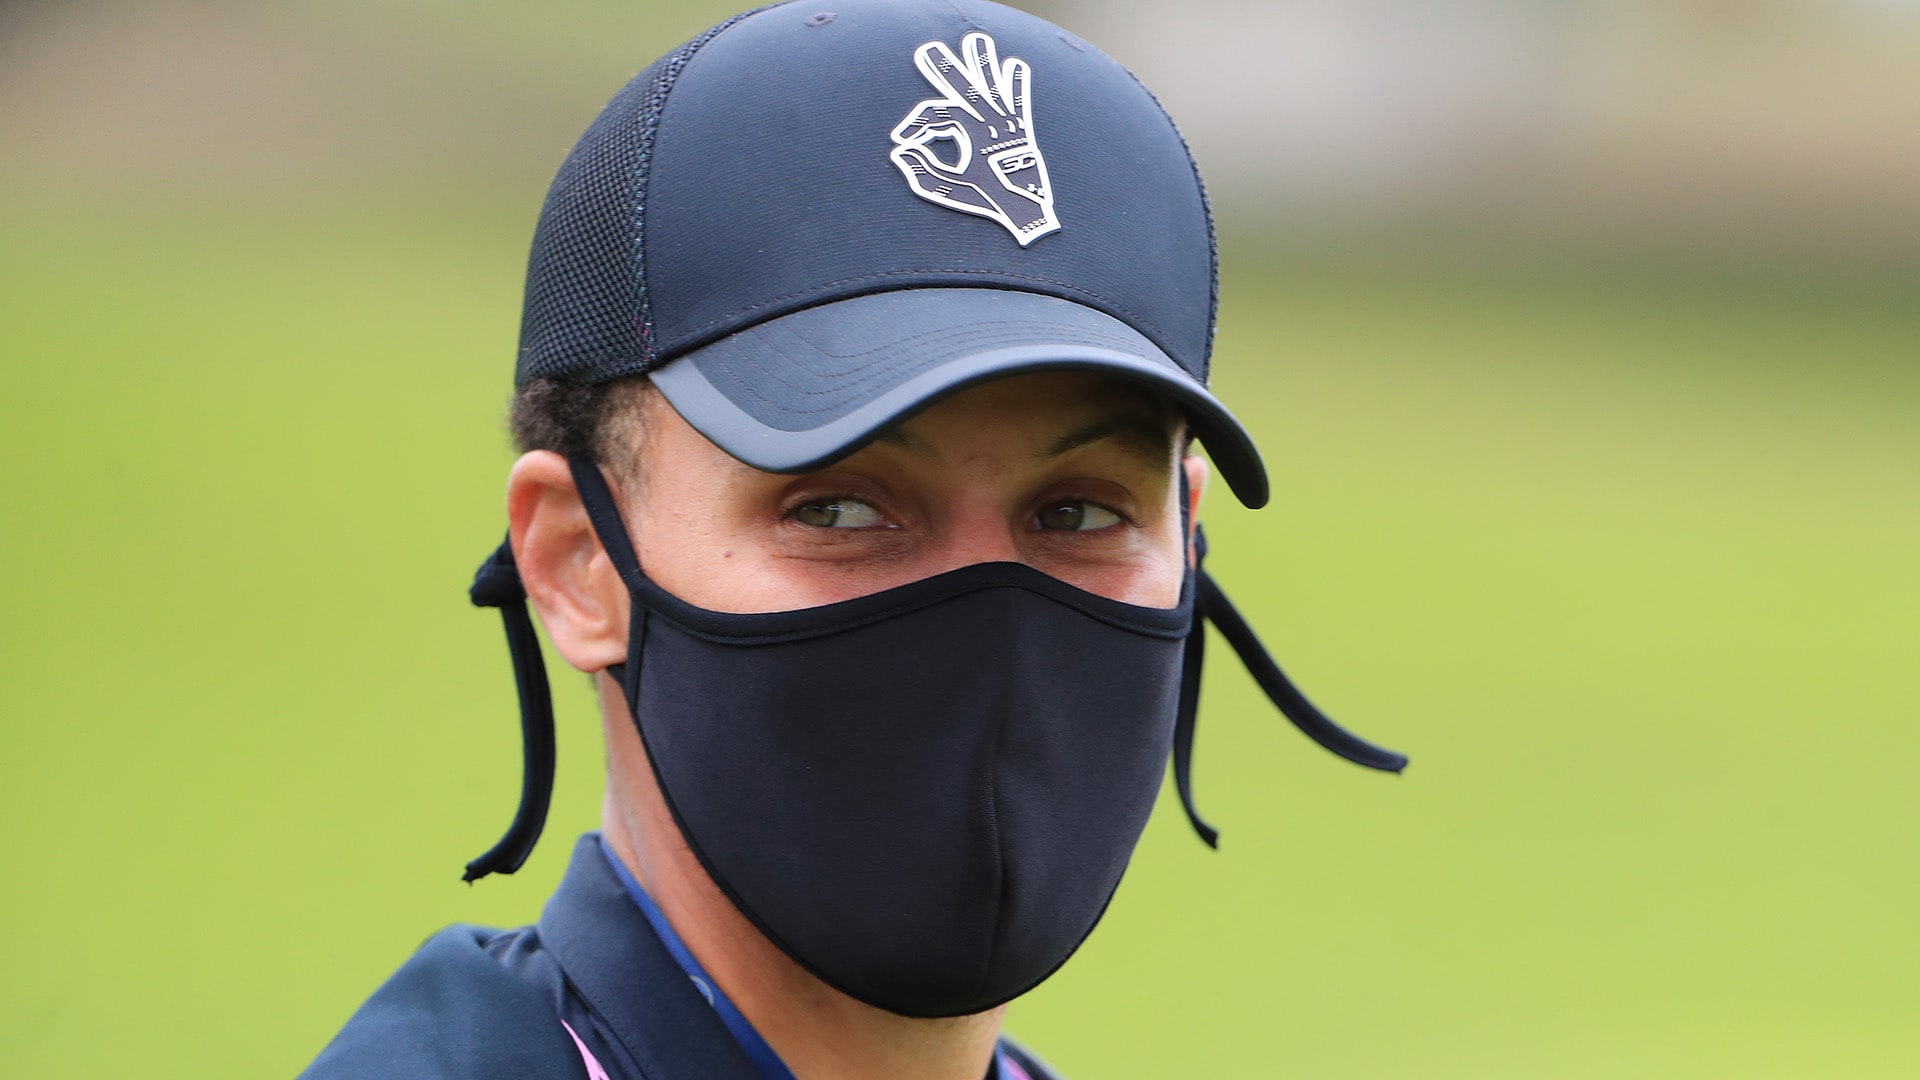 With three months to kill, Steph Curry offers his caddie services to Collin Morikawa